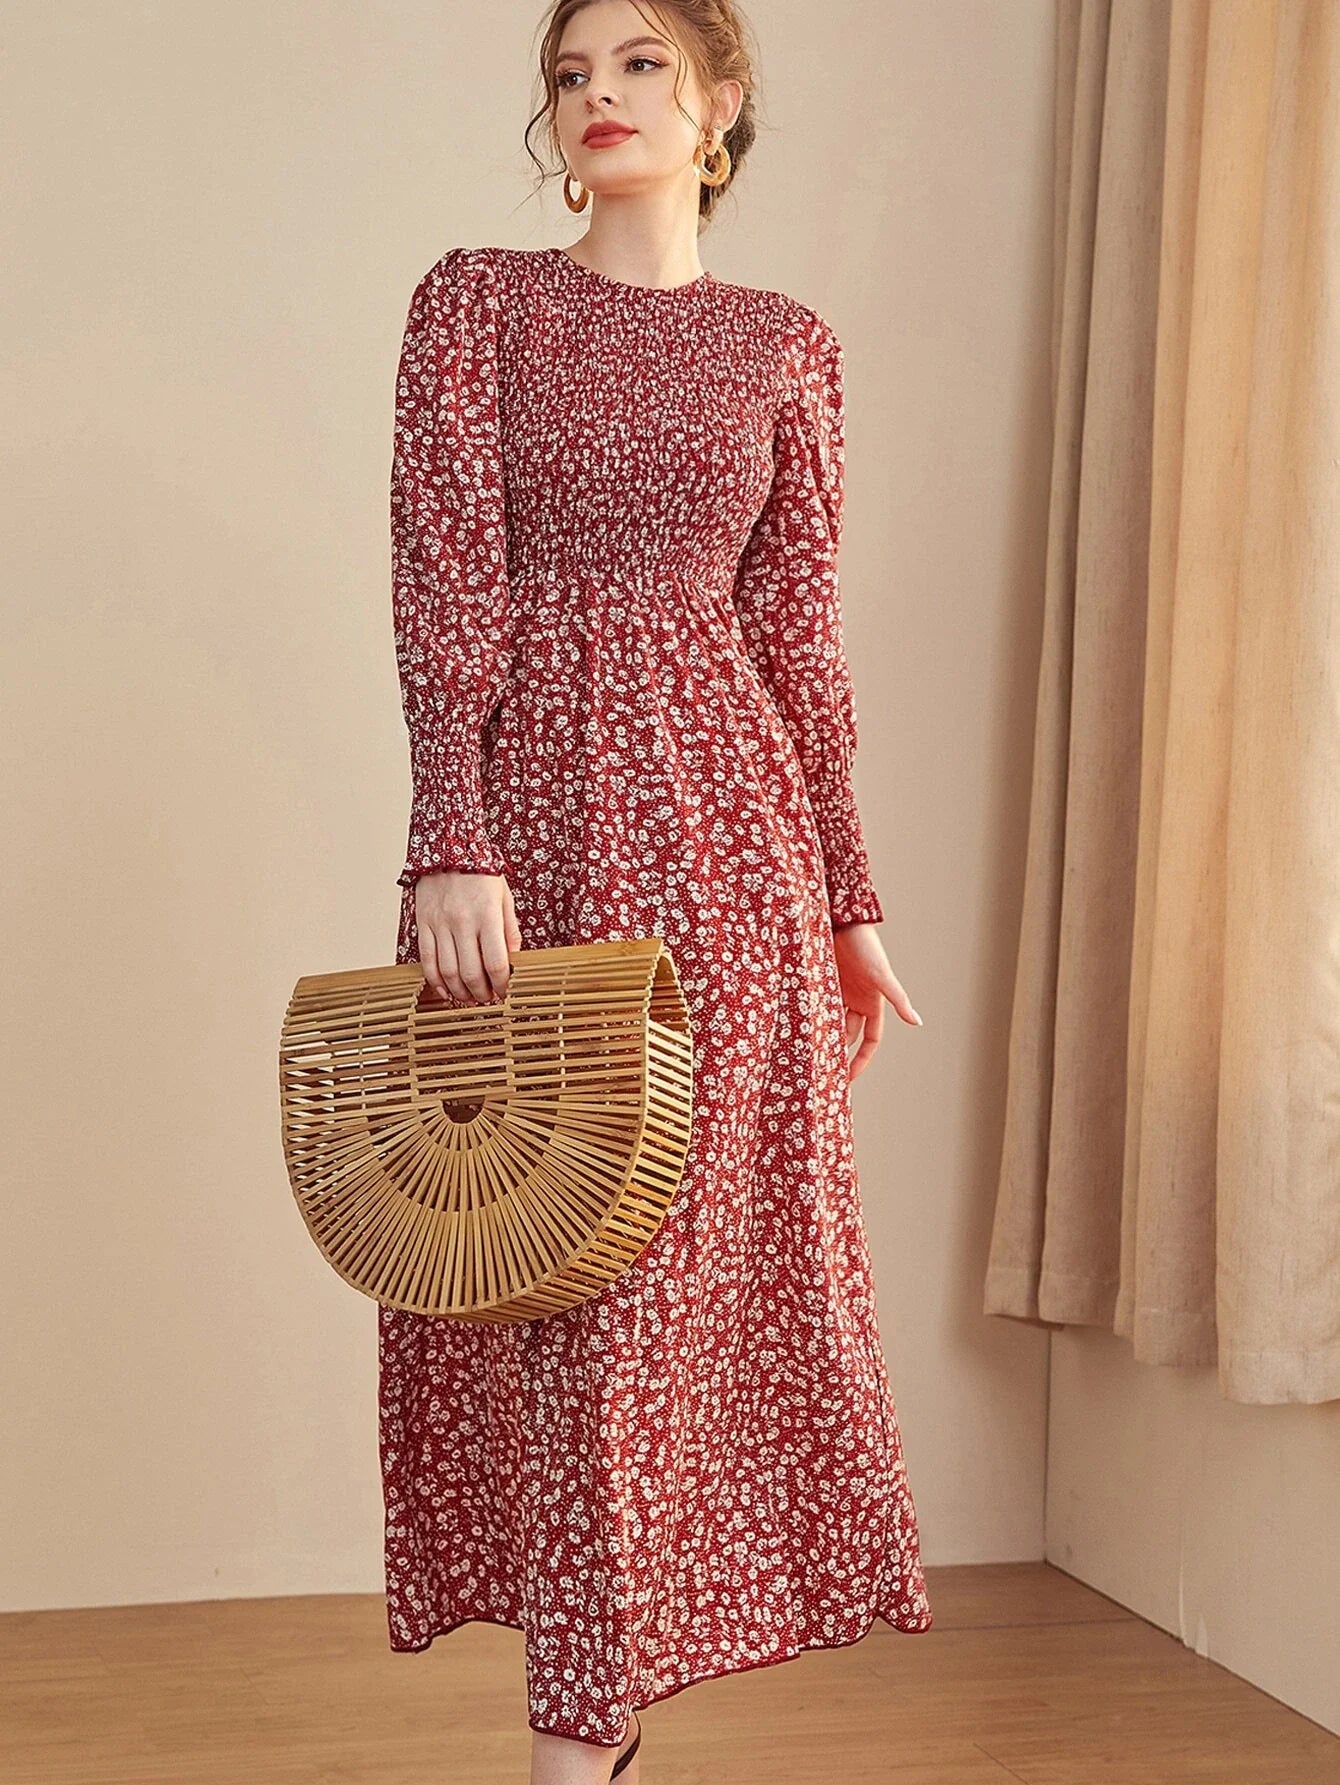 Buy Shein Mulvari Ditsy Floral Puff Sleeve Shirred A Line Dress in Pakistan